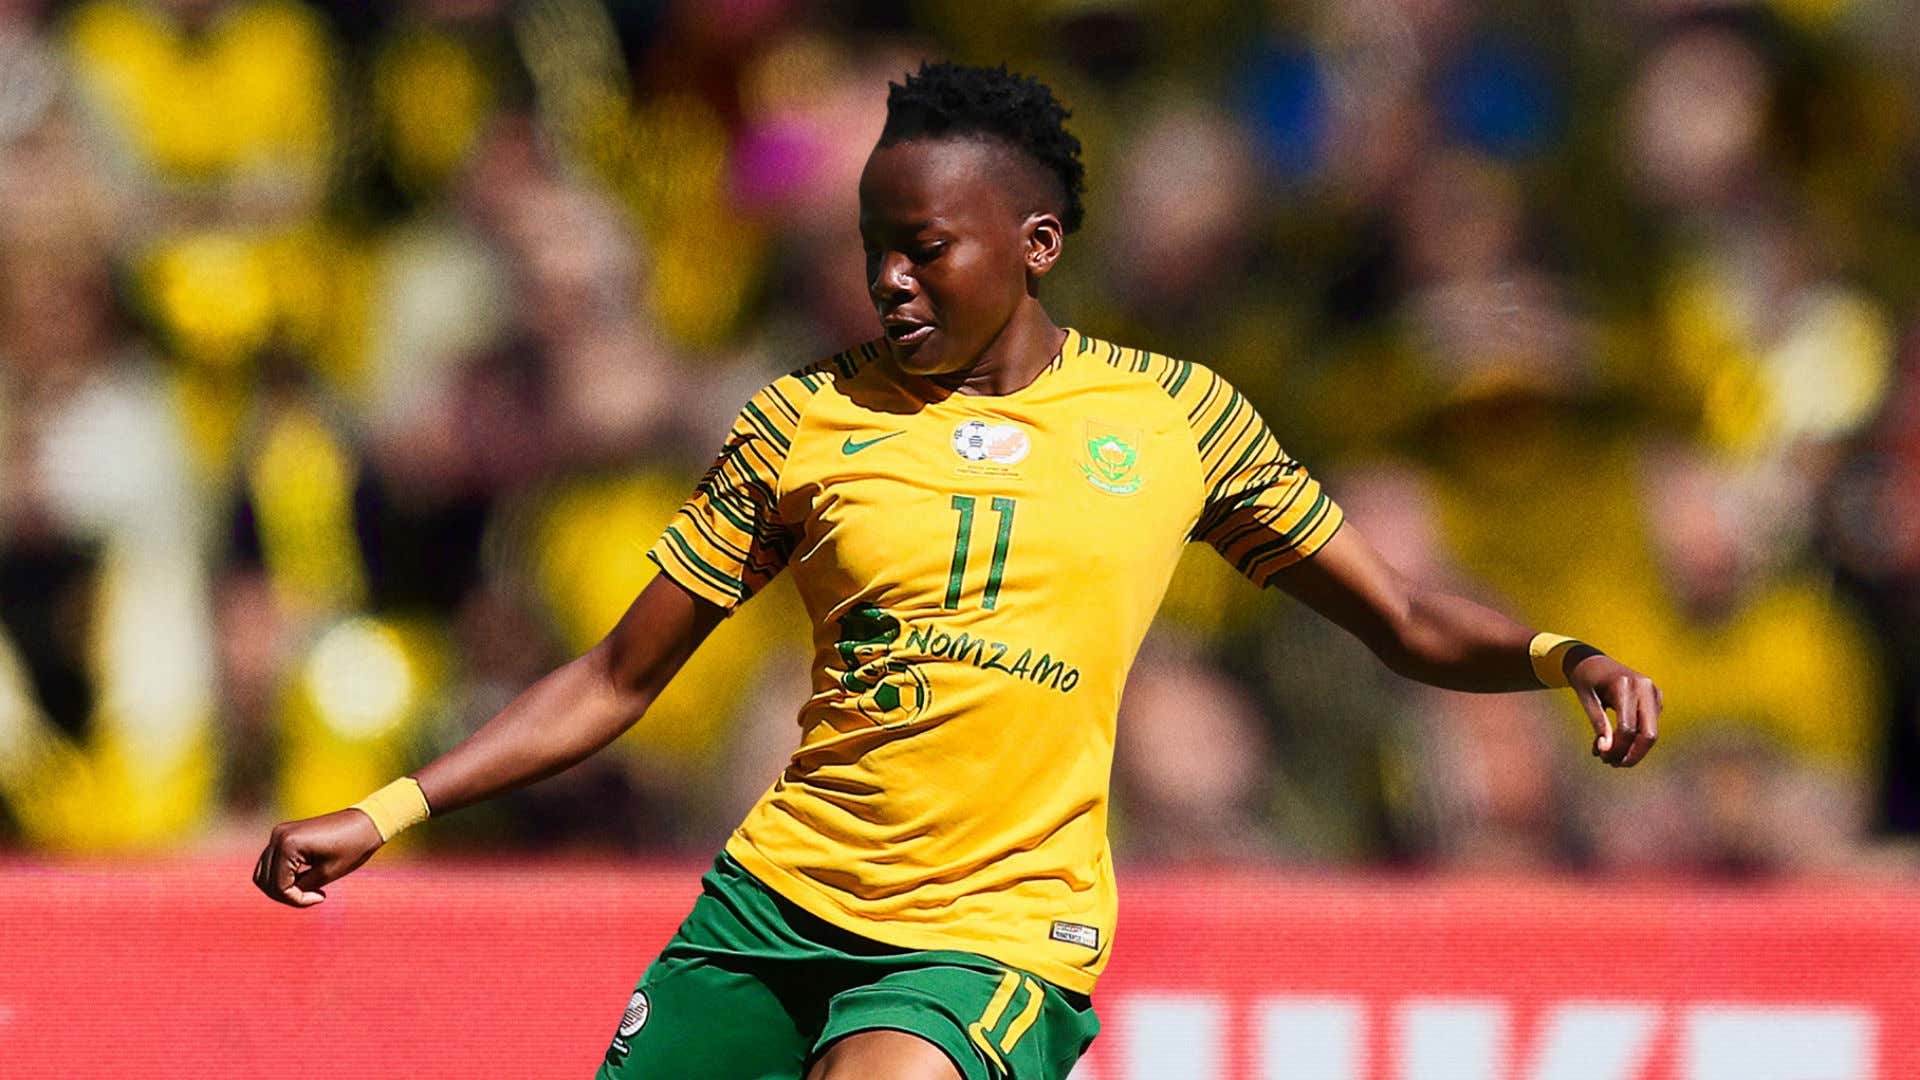 Women's World Cup 2019 kits South Africa